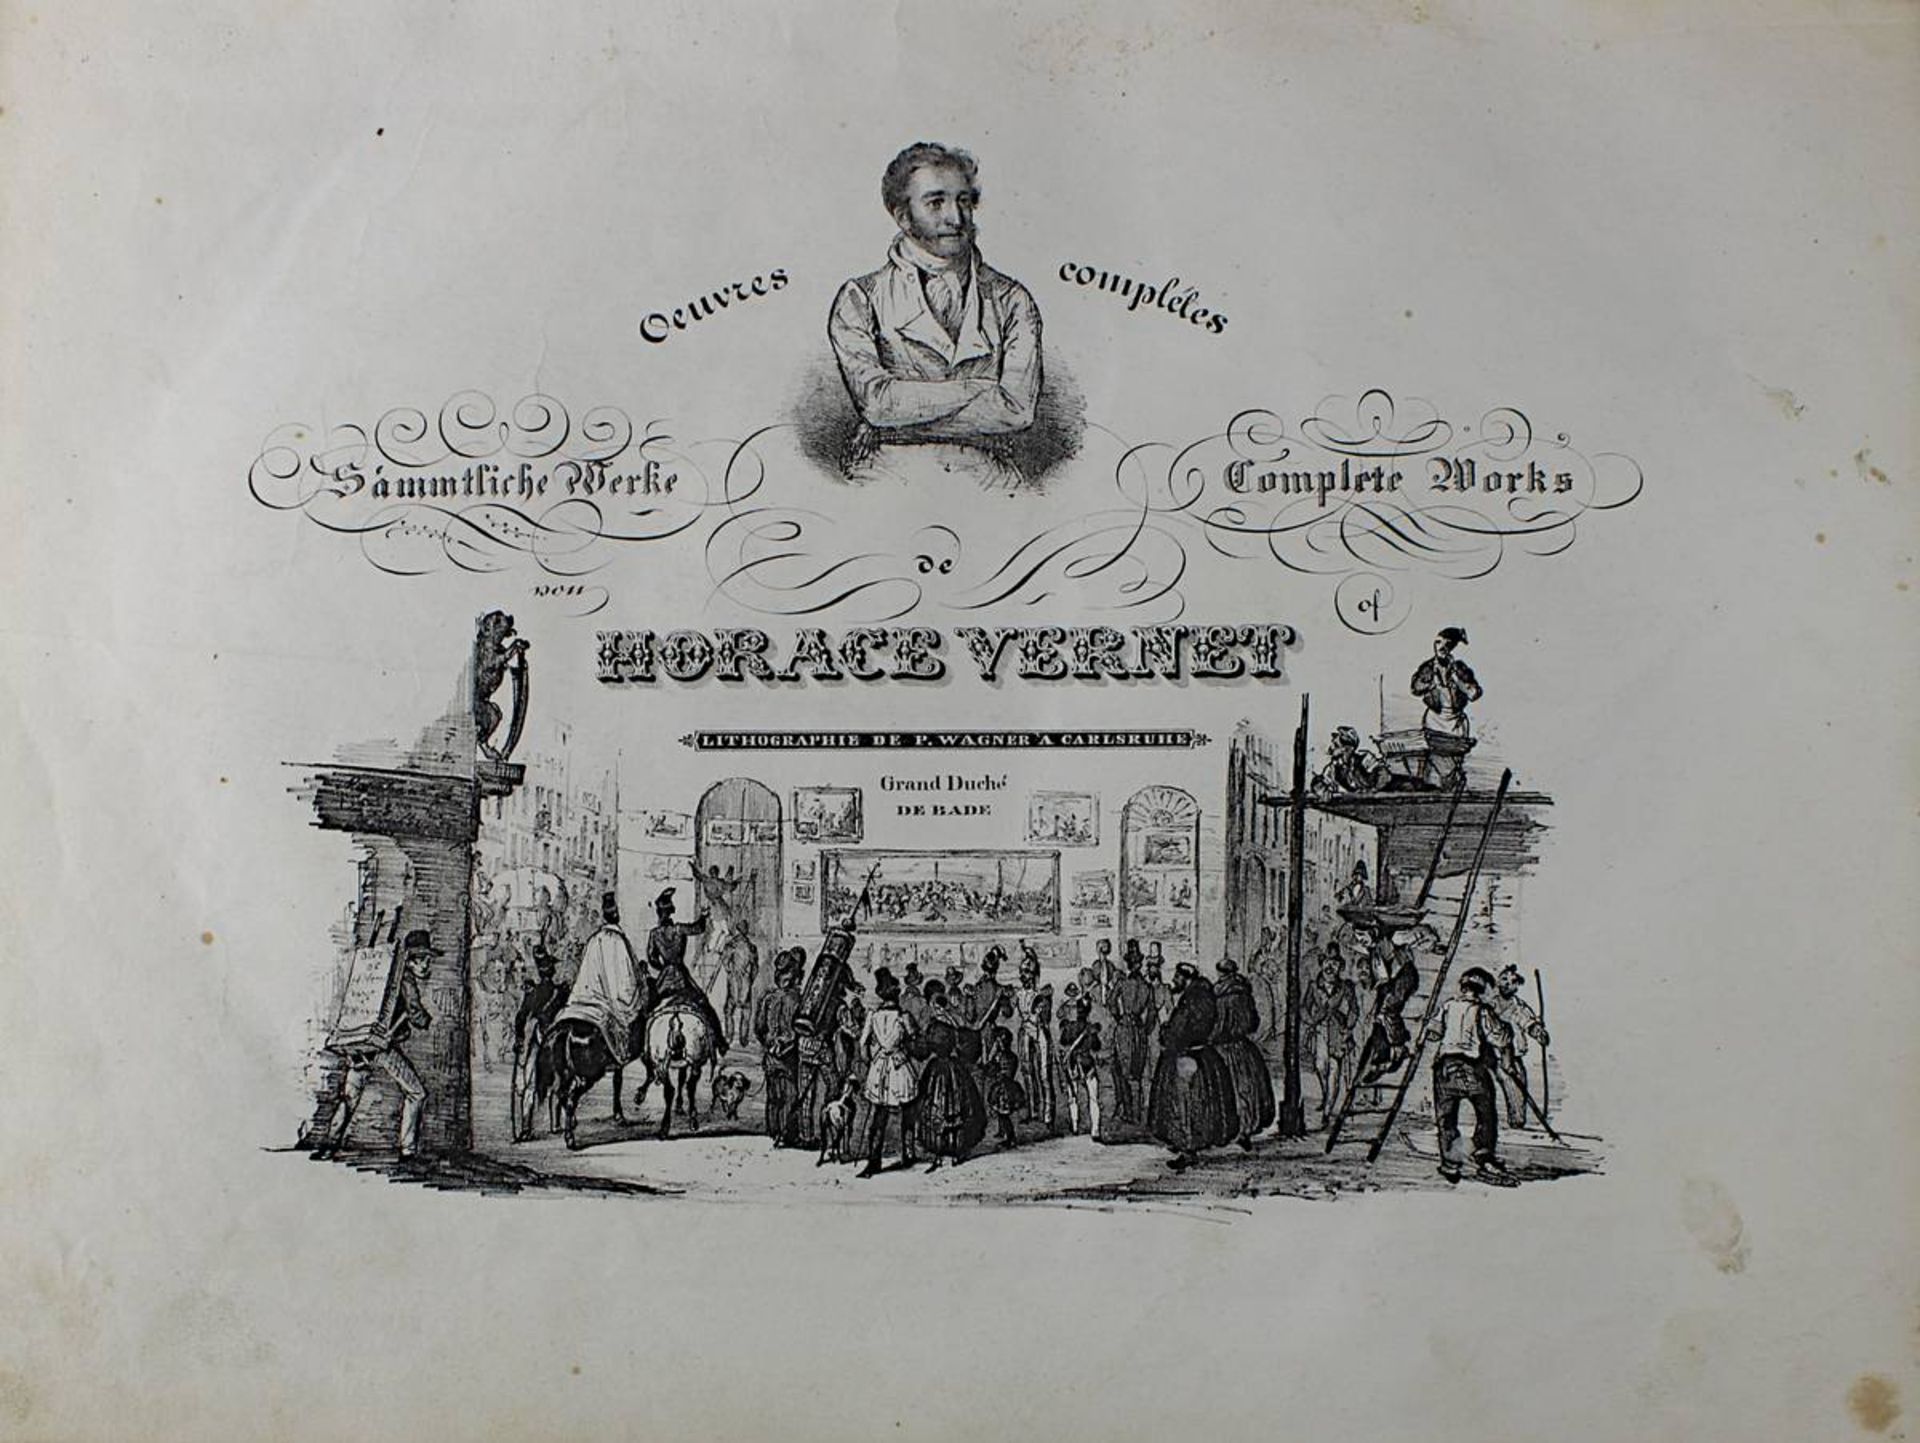 Vernet, Horace, Oeuvres Completes, Karlsruhe o. J. (ca. 1840), Tafelband mit 70 Lithographien und